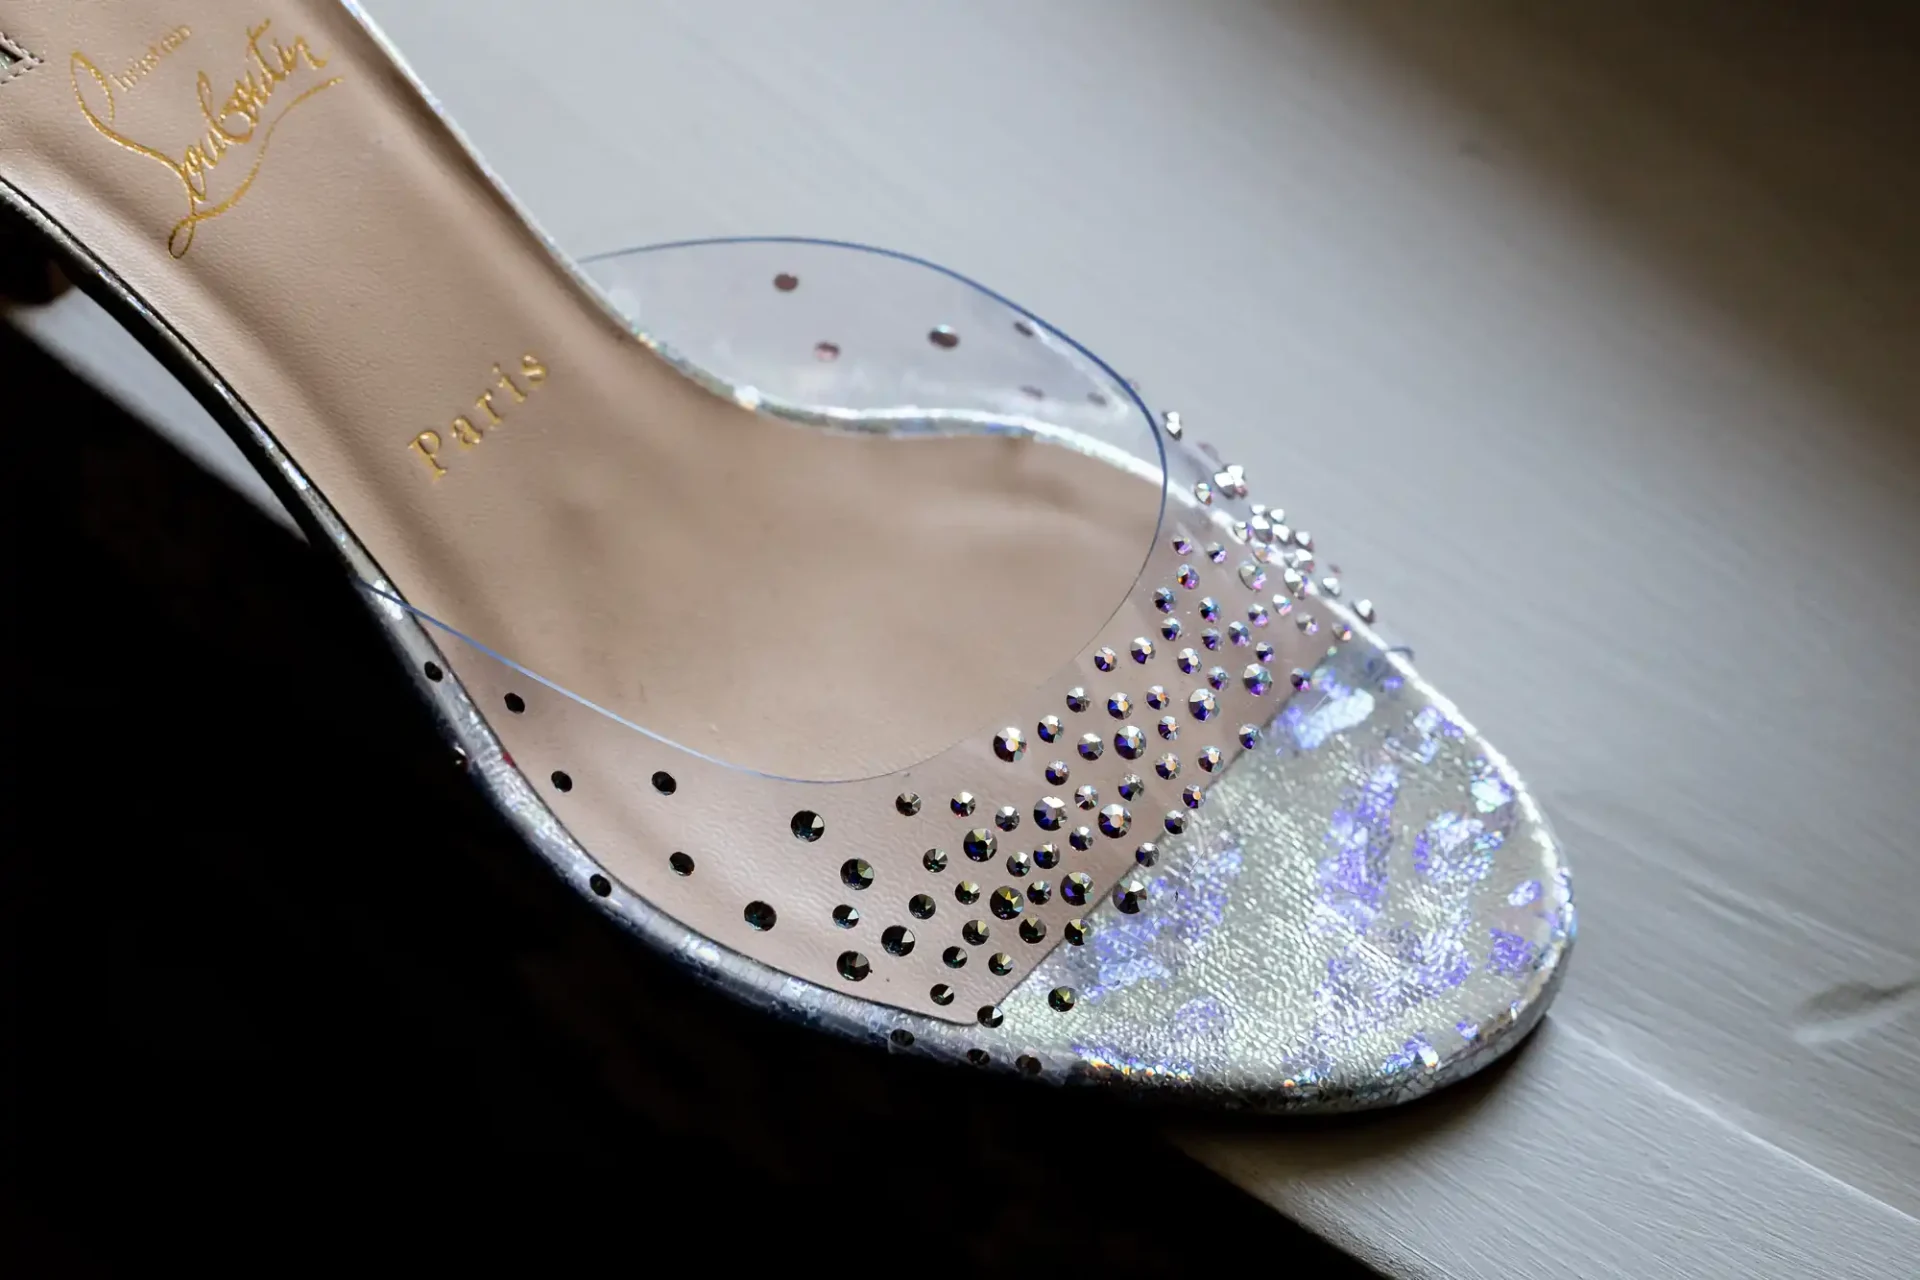 A close-up of a christian louboutin transparent slipper with rhinestone embellishments, displayed on a wooden surface.